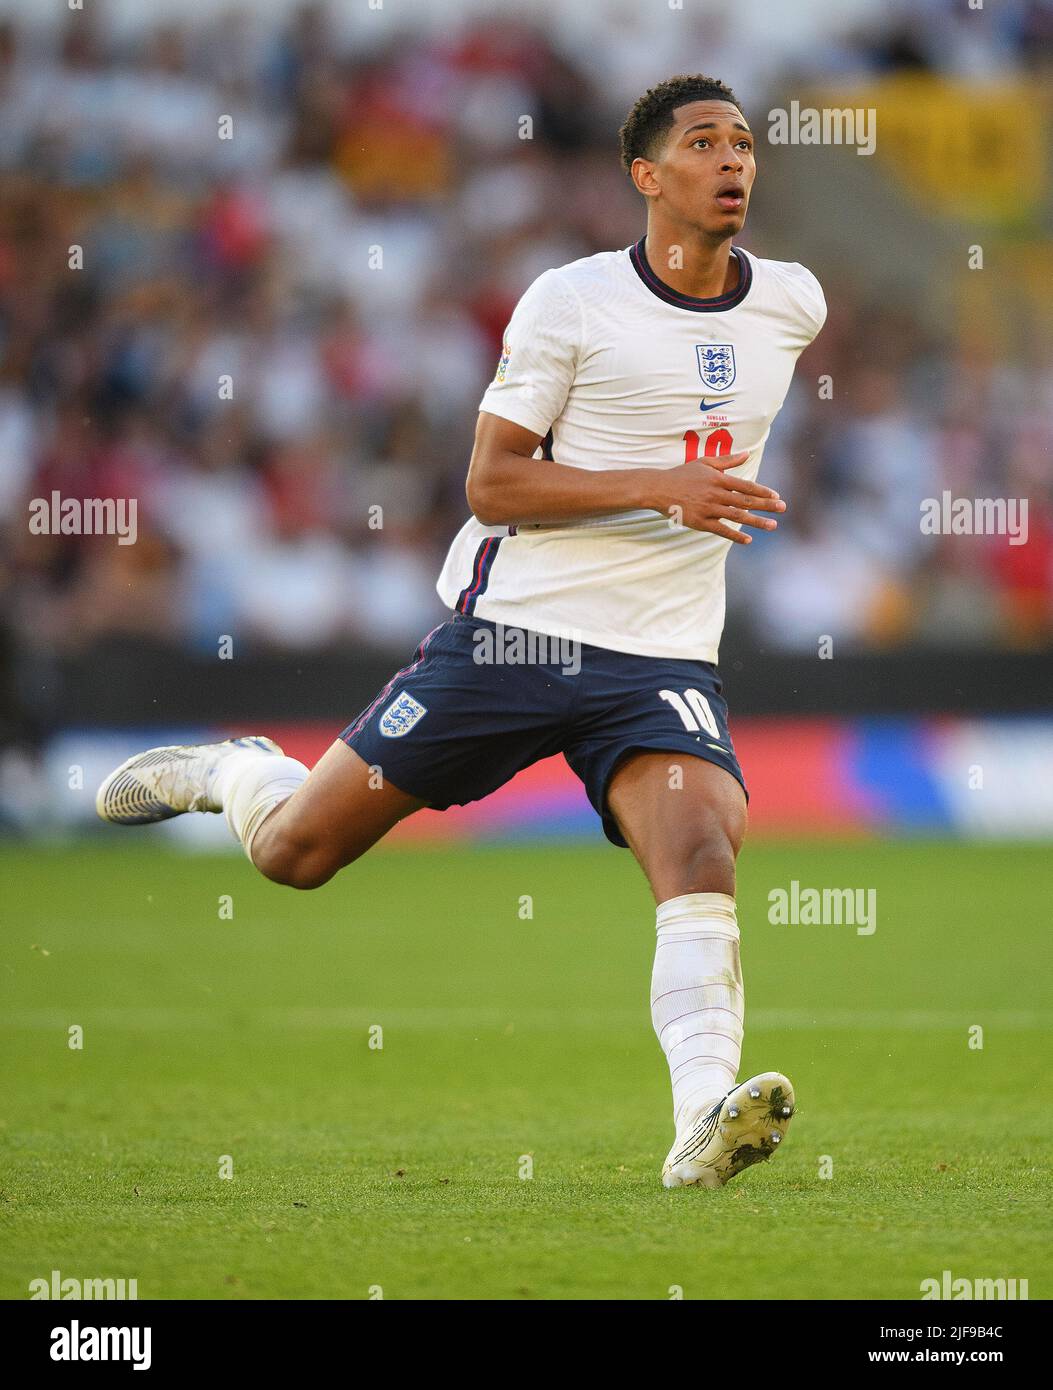 England v Hungary - UEFA Nations League. 14/6/22/ Jude Bellingham during the Nations League match against Hungary. Pic : Mark Pain / Alamy. Stock Photo